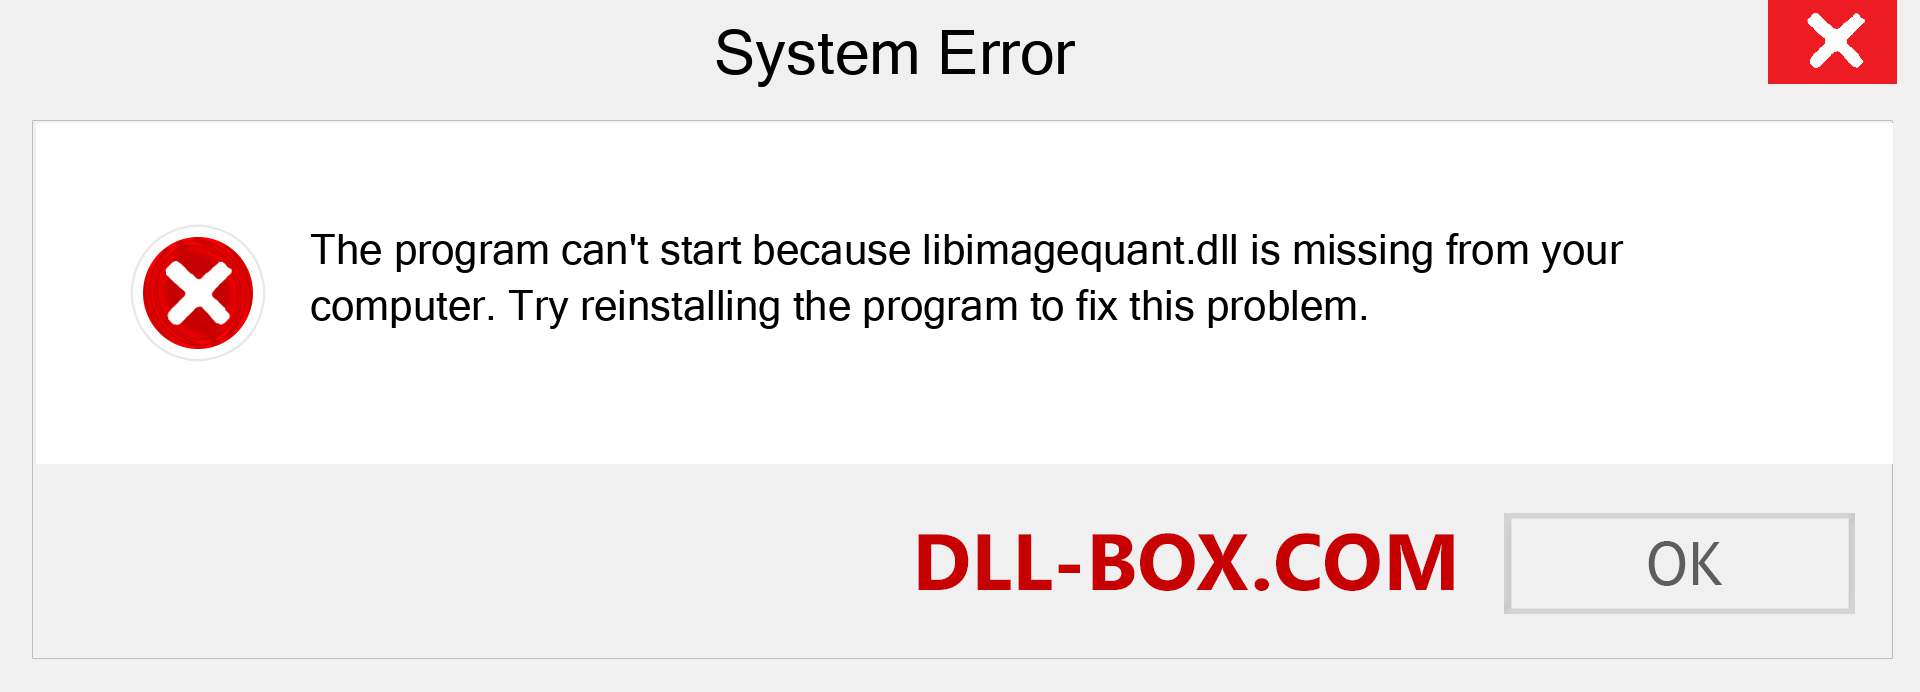  libimagequant.dll file is missing?. Download for Windows 7, 8, 10 - Fix  libimagequant dll Missing Error on Windows, photos, images